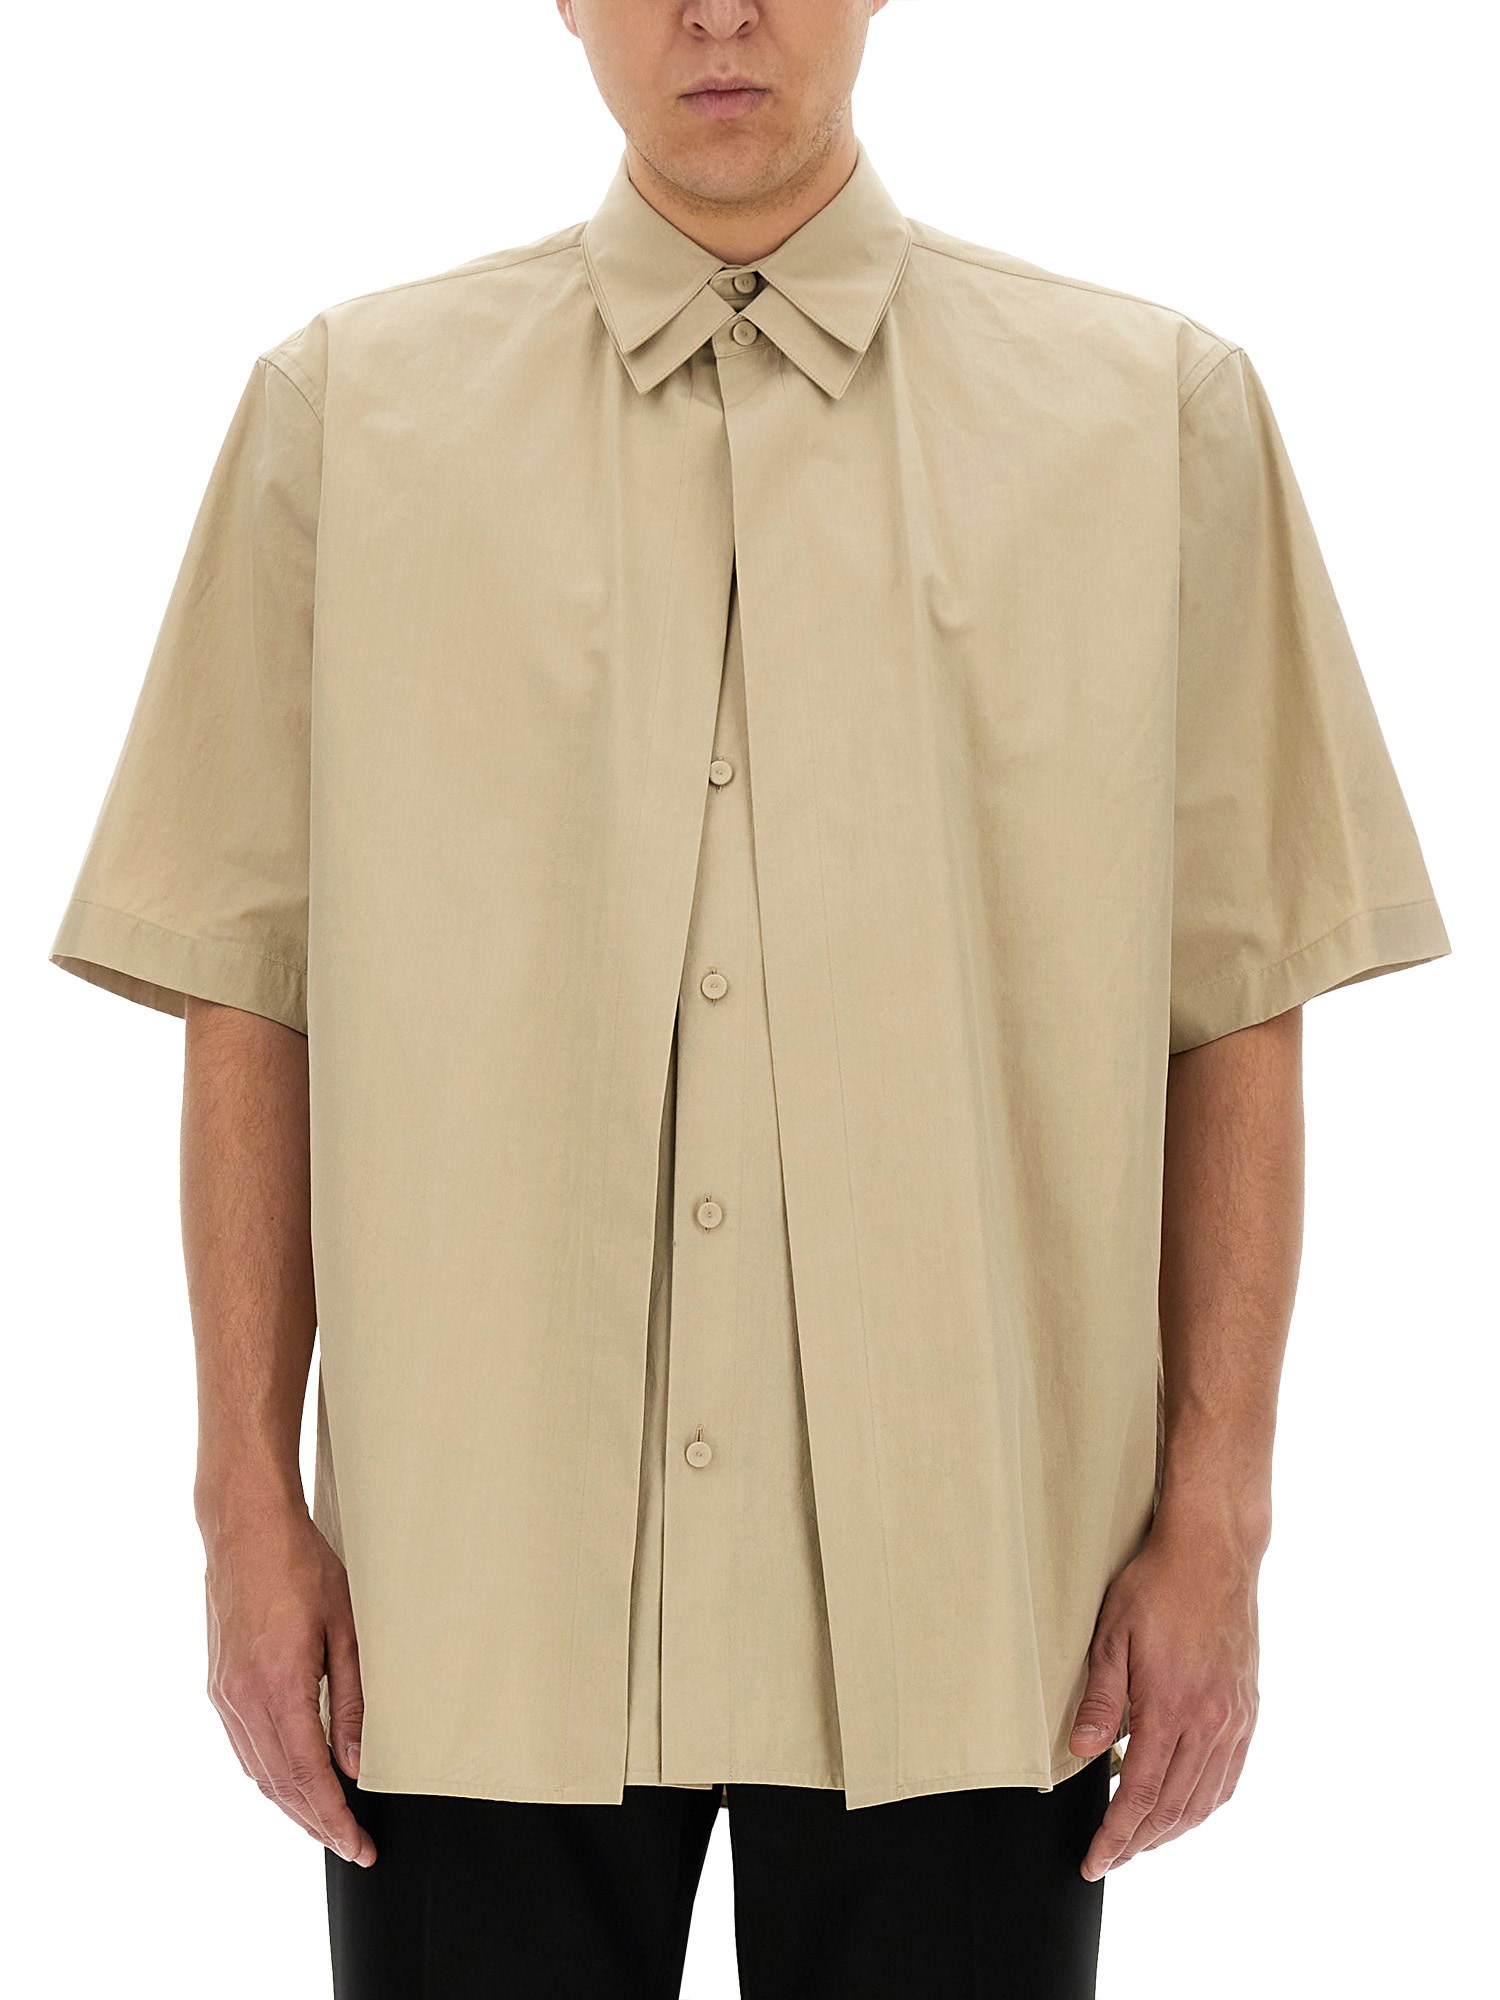 jil sander shirt with double layer design